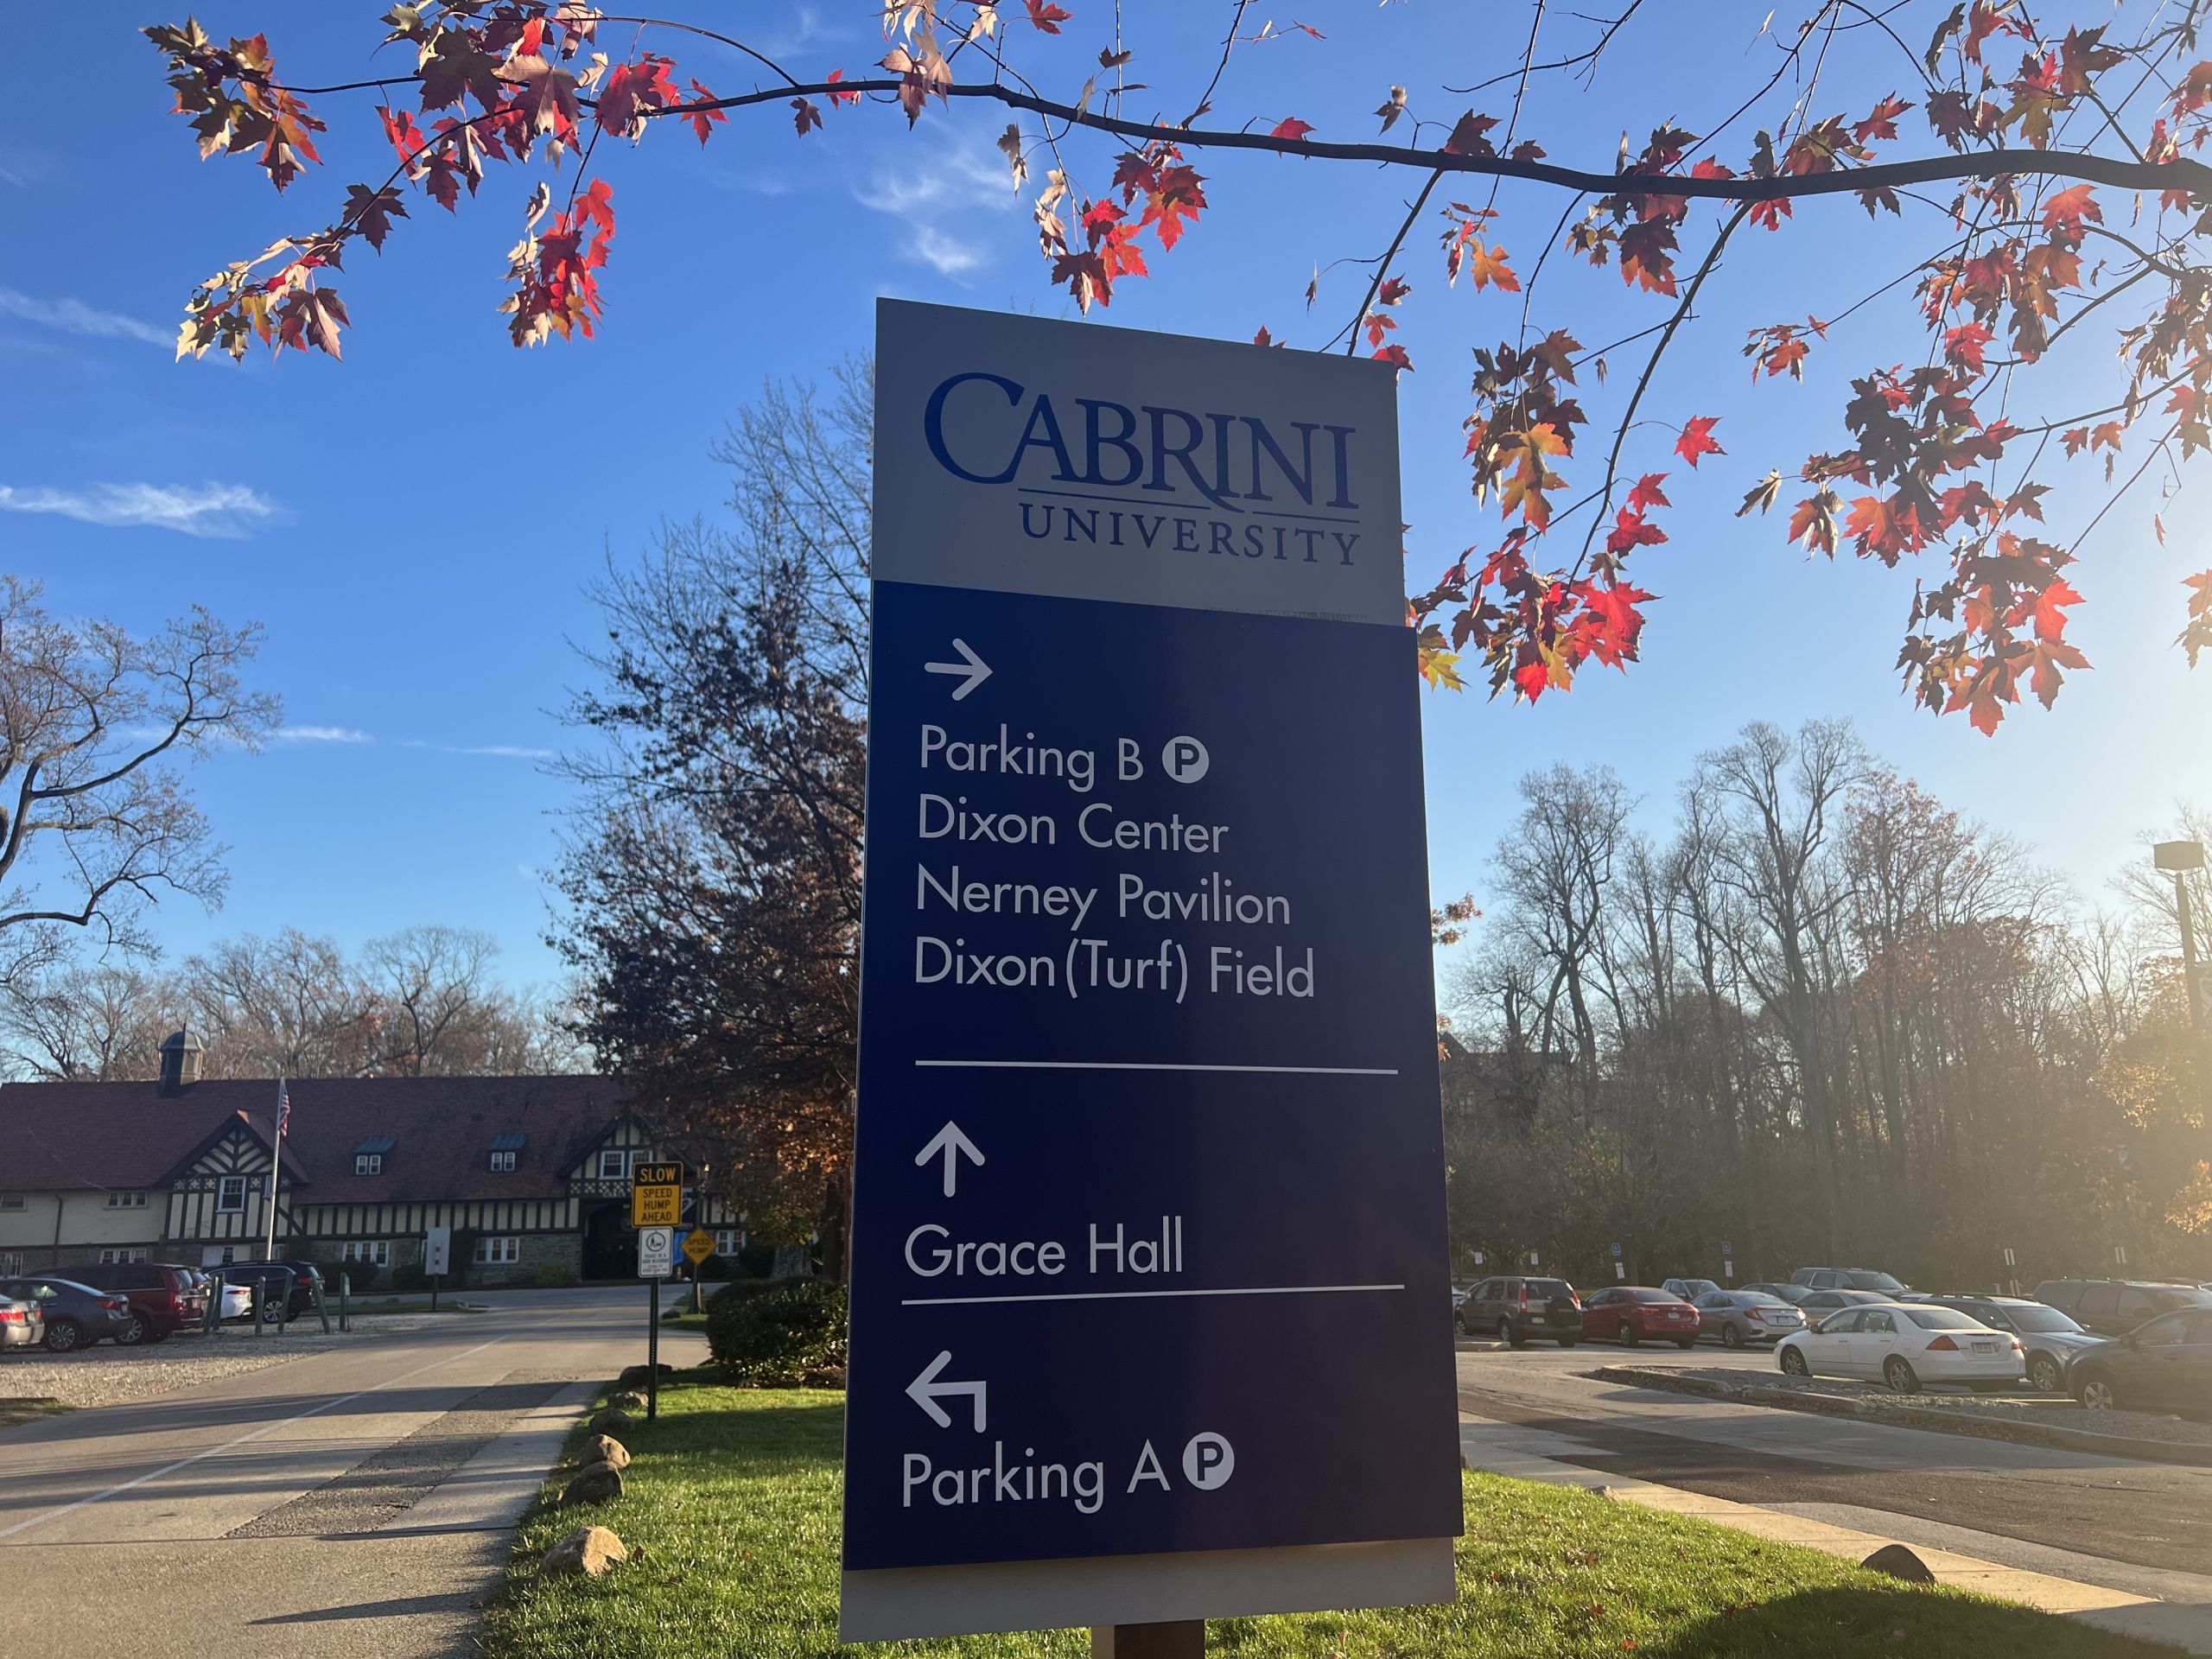 Cabrini University's parking signs with directions to the parking lots. Photo by Micah Balobalo.